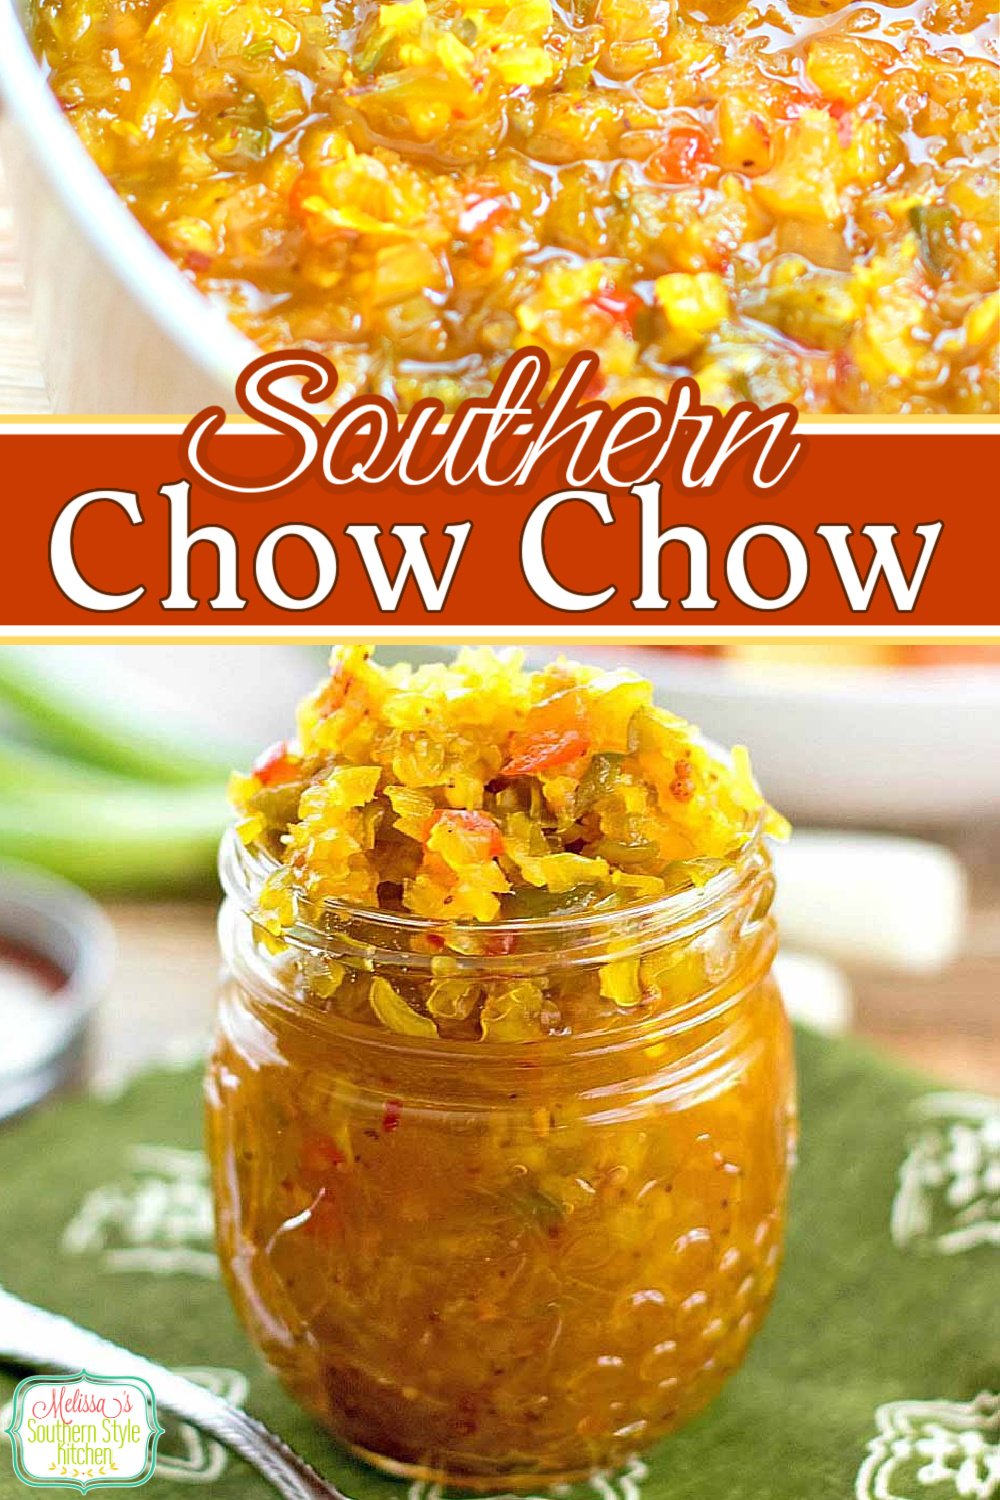 Sweet and tangy Chow Chow relish is a Southern classic to serve on hot dogs, pinto beans and beyond #chowchow #slaw #cabbagerecipes #southernchowchow #homeadereslish #condiments #southernfood #southernrecipes #vegetarian via @melissasssk